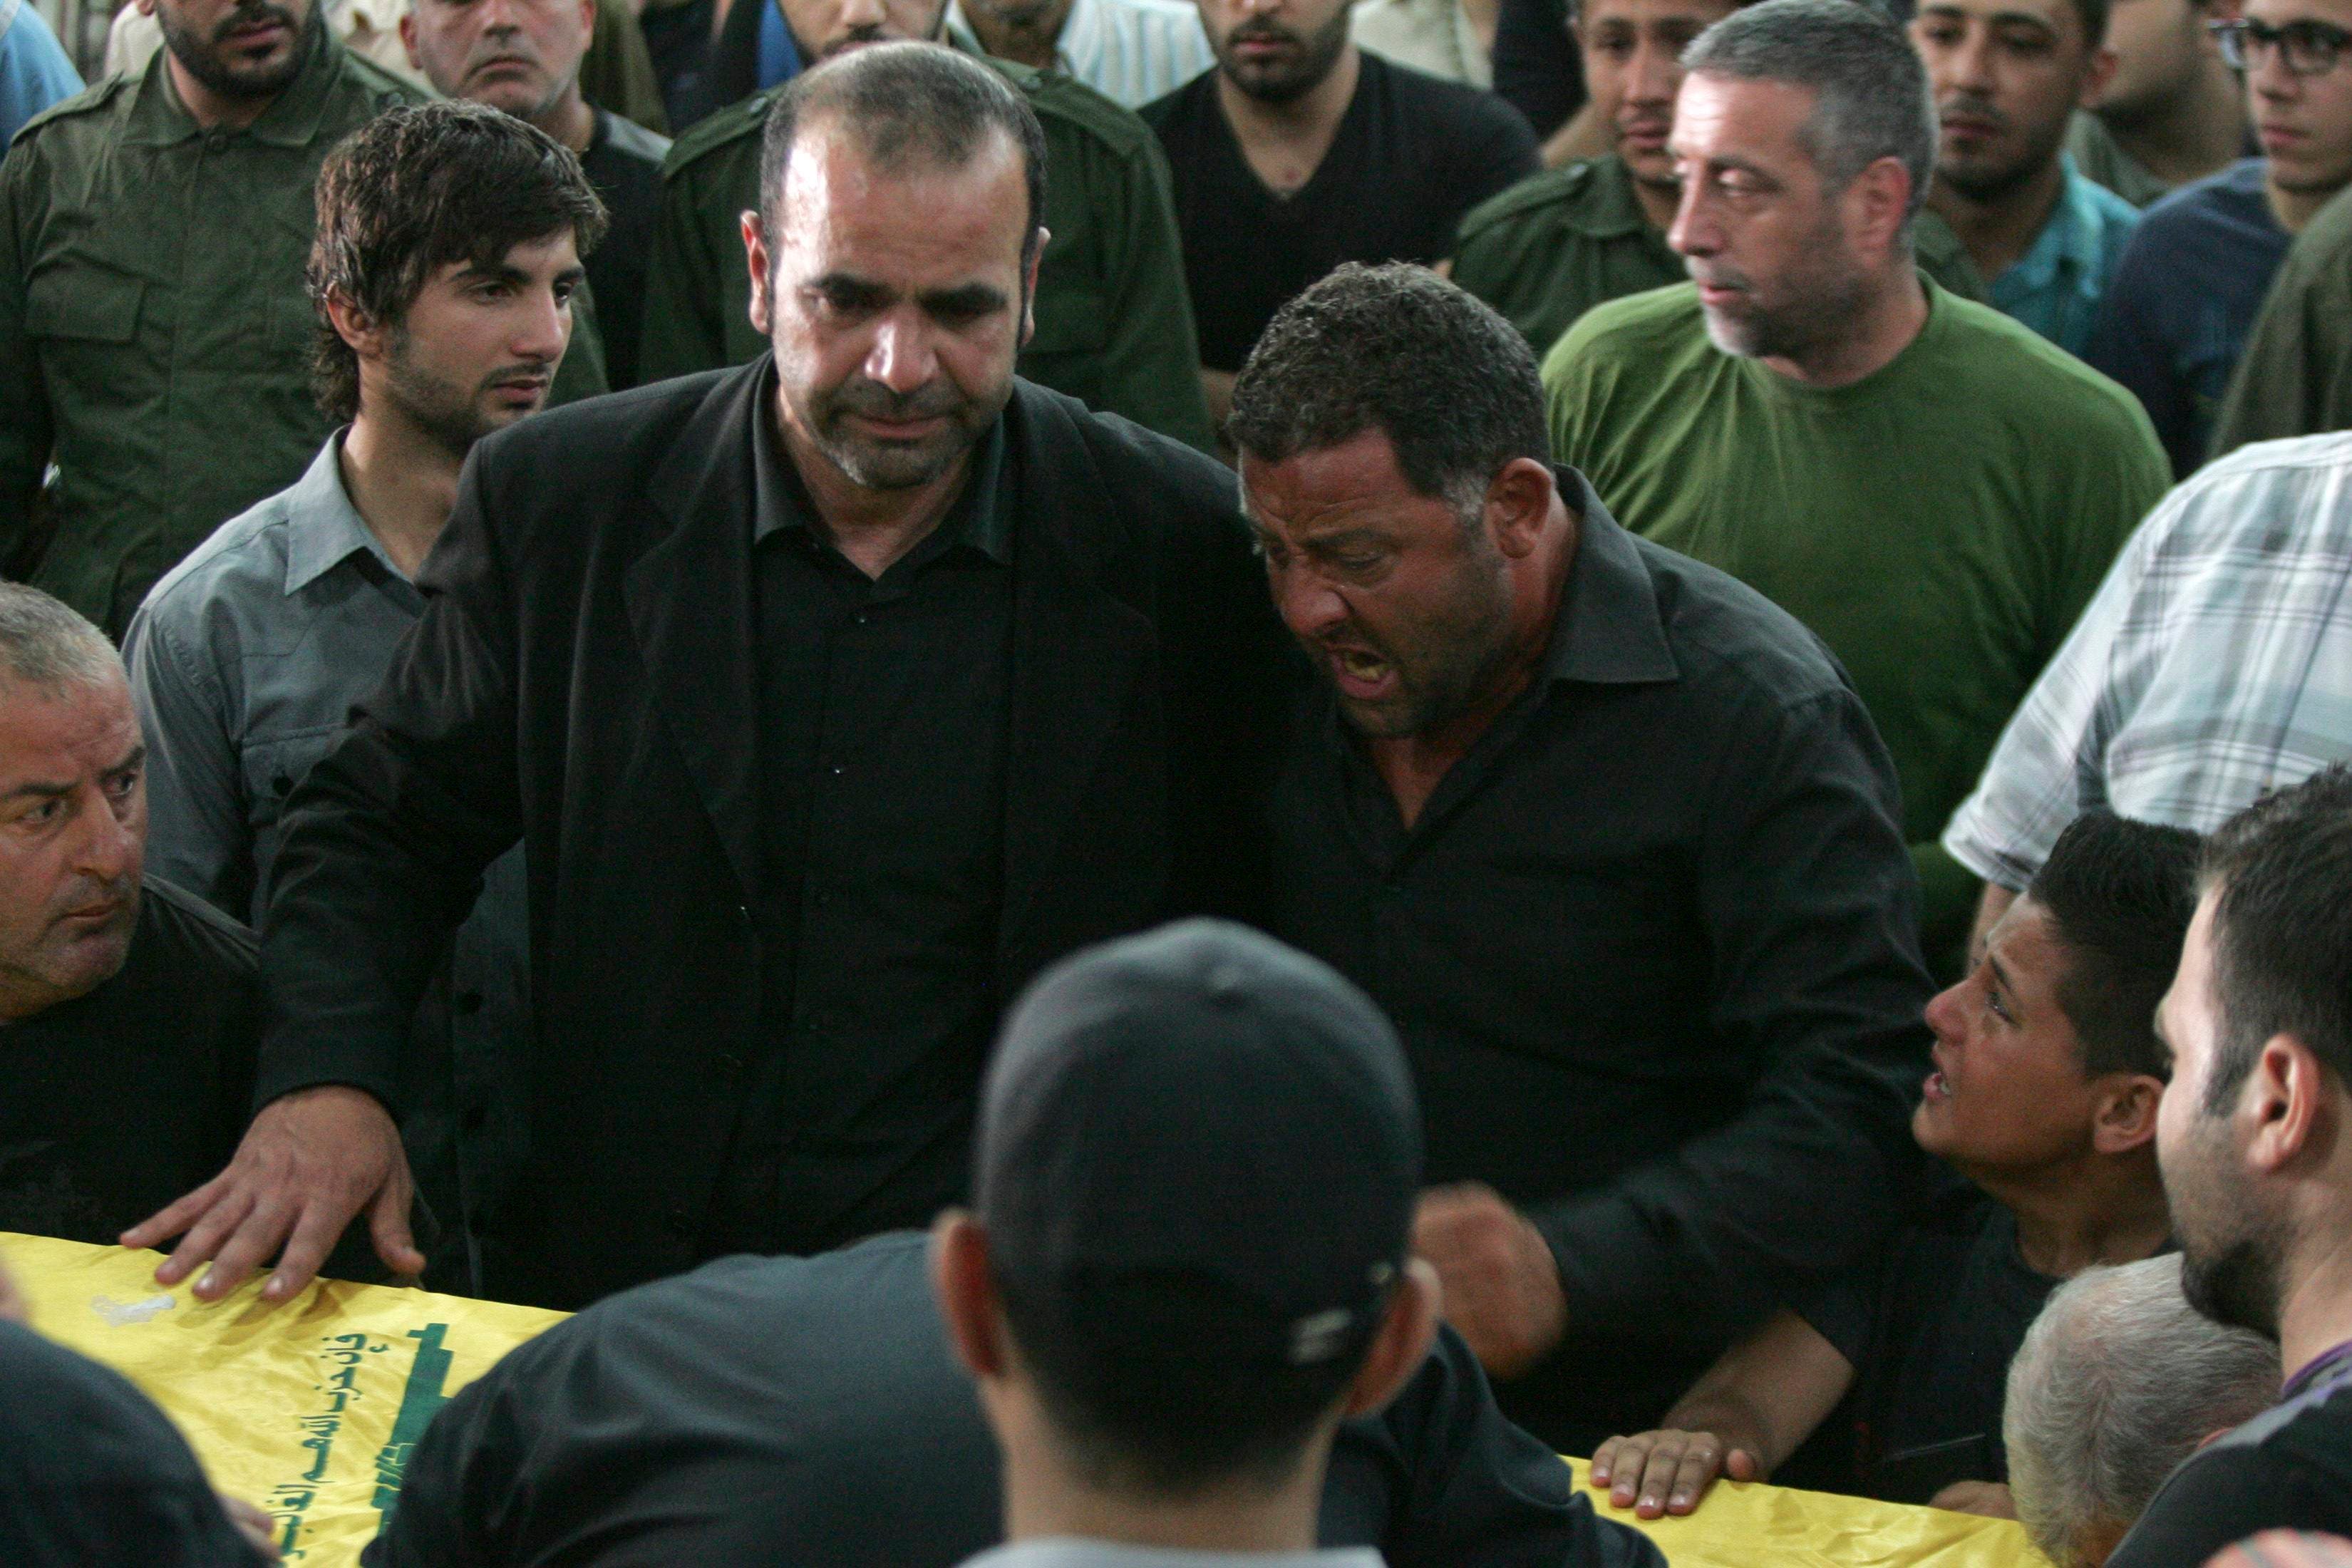 Relatives mourn during the funeral of Hezbollah member Hussein Ahmad Abu Hasan in Beirut’s suburbs May 21, 2013. (Reuters)